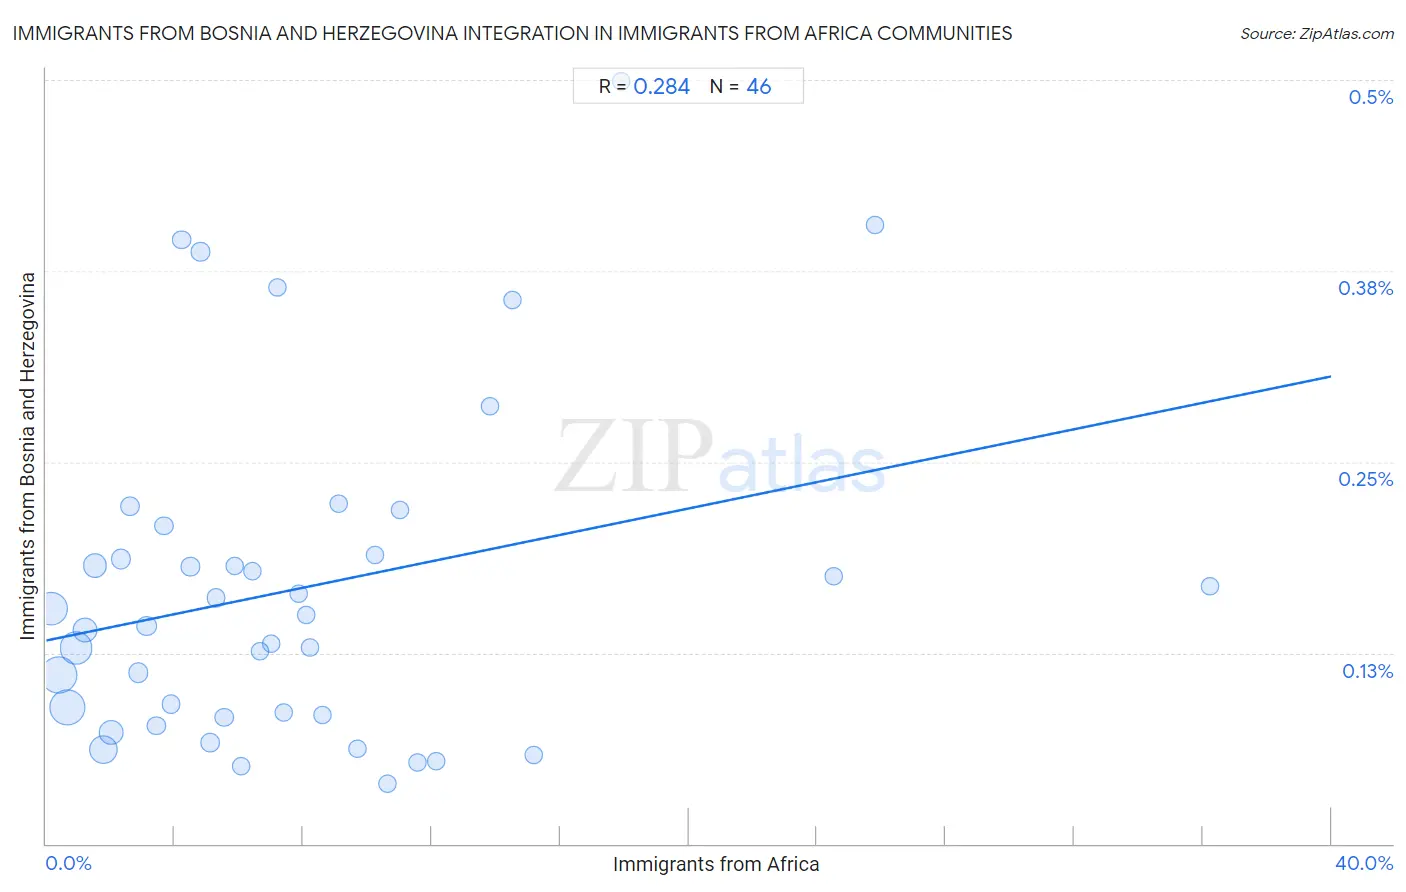 Immigrants from Africa Integration in Immigrants from Bosnia and Herzegovina Communities